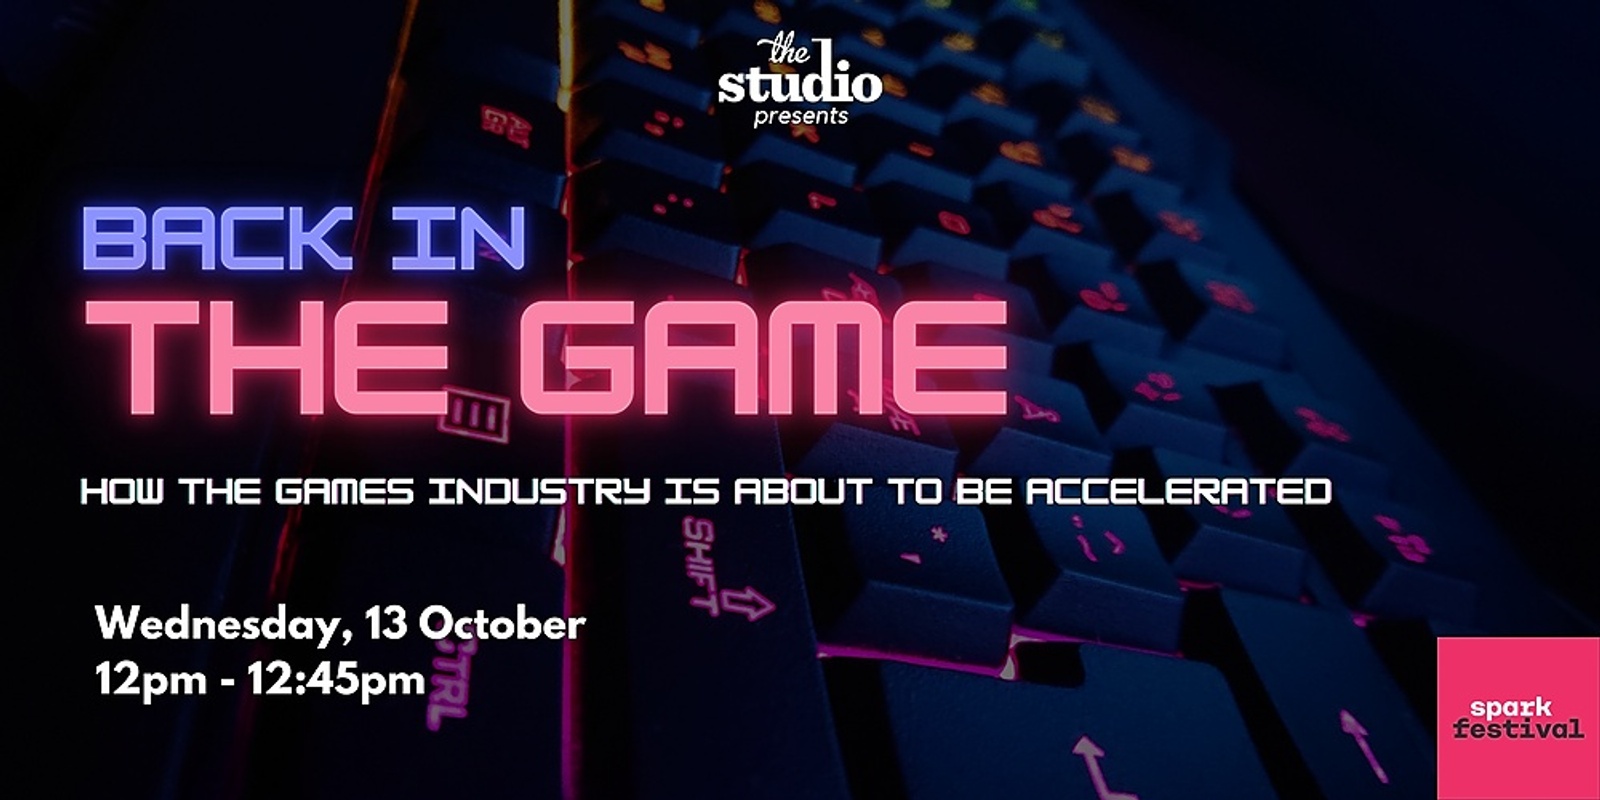 Banner image for Back in the Game - The Studio & Spark Festival